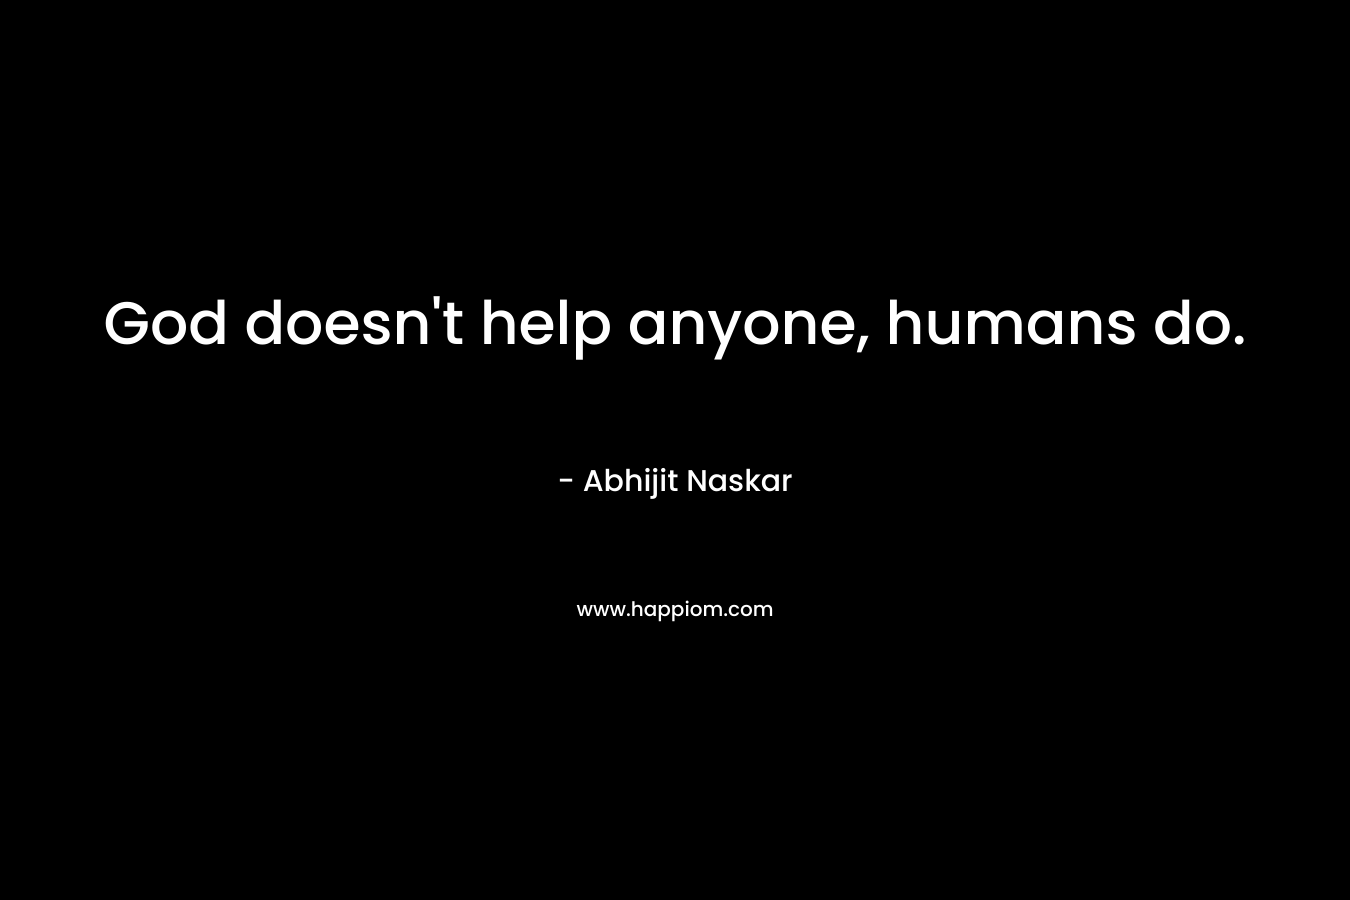 God doesn't help anyone, humans do.